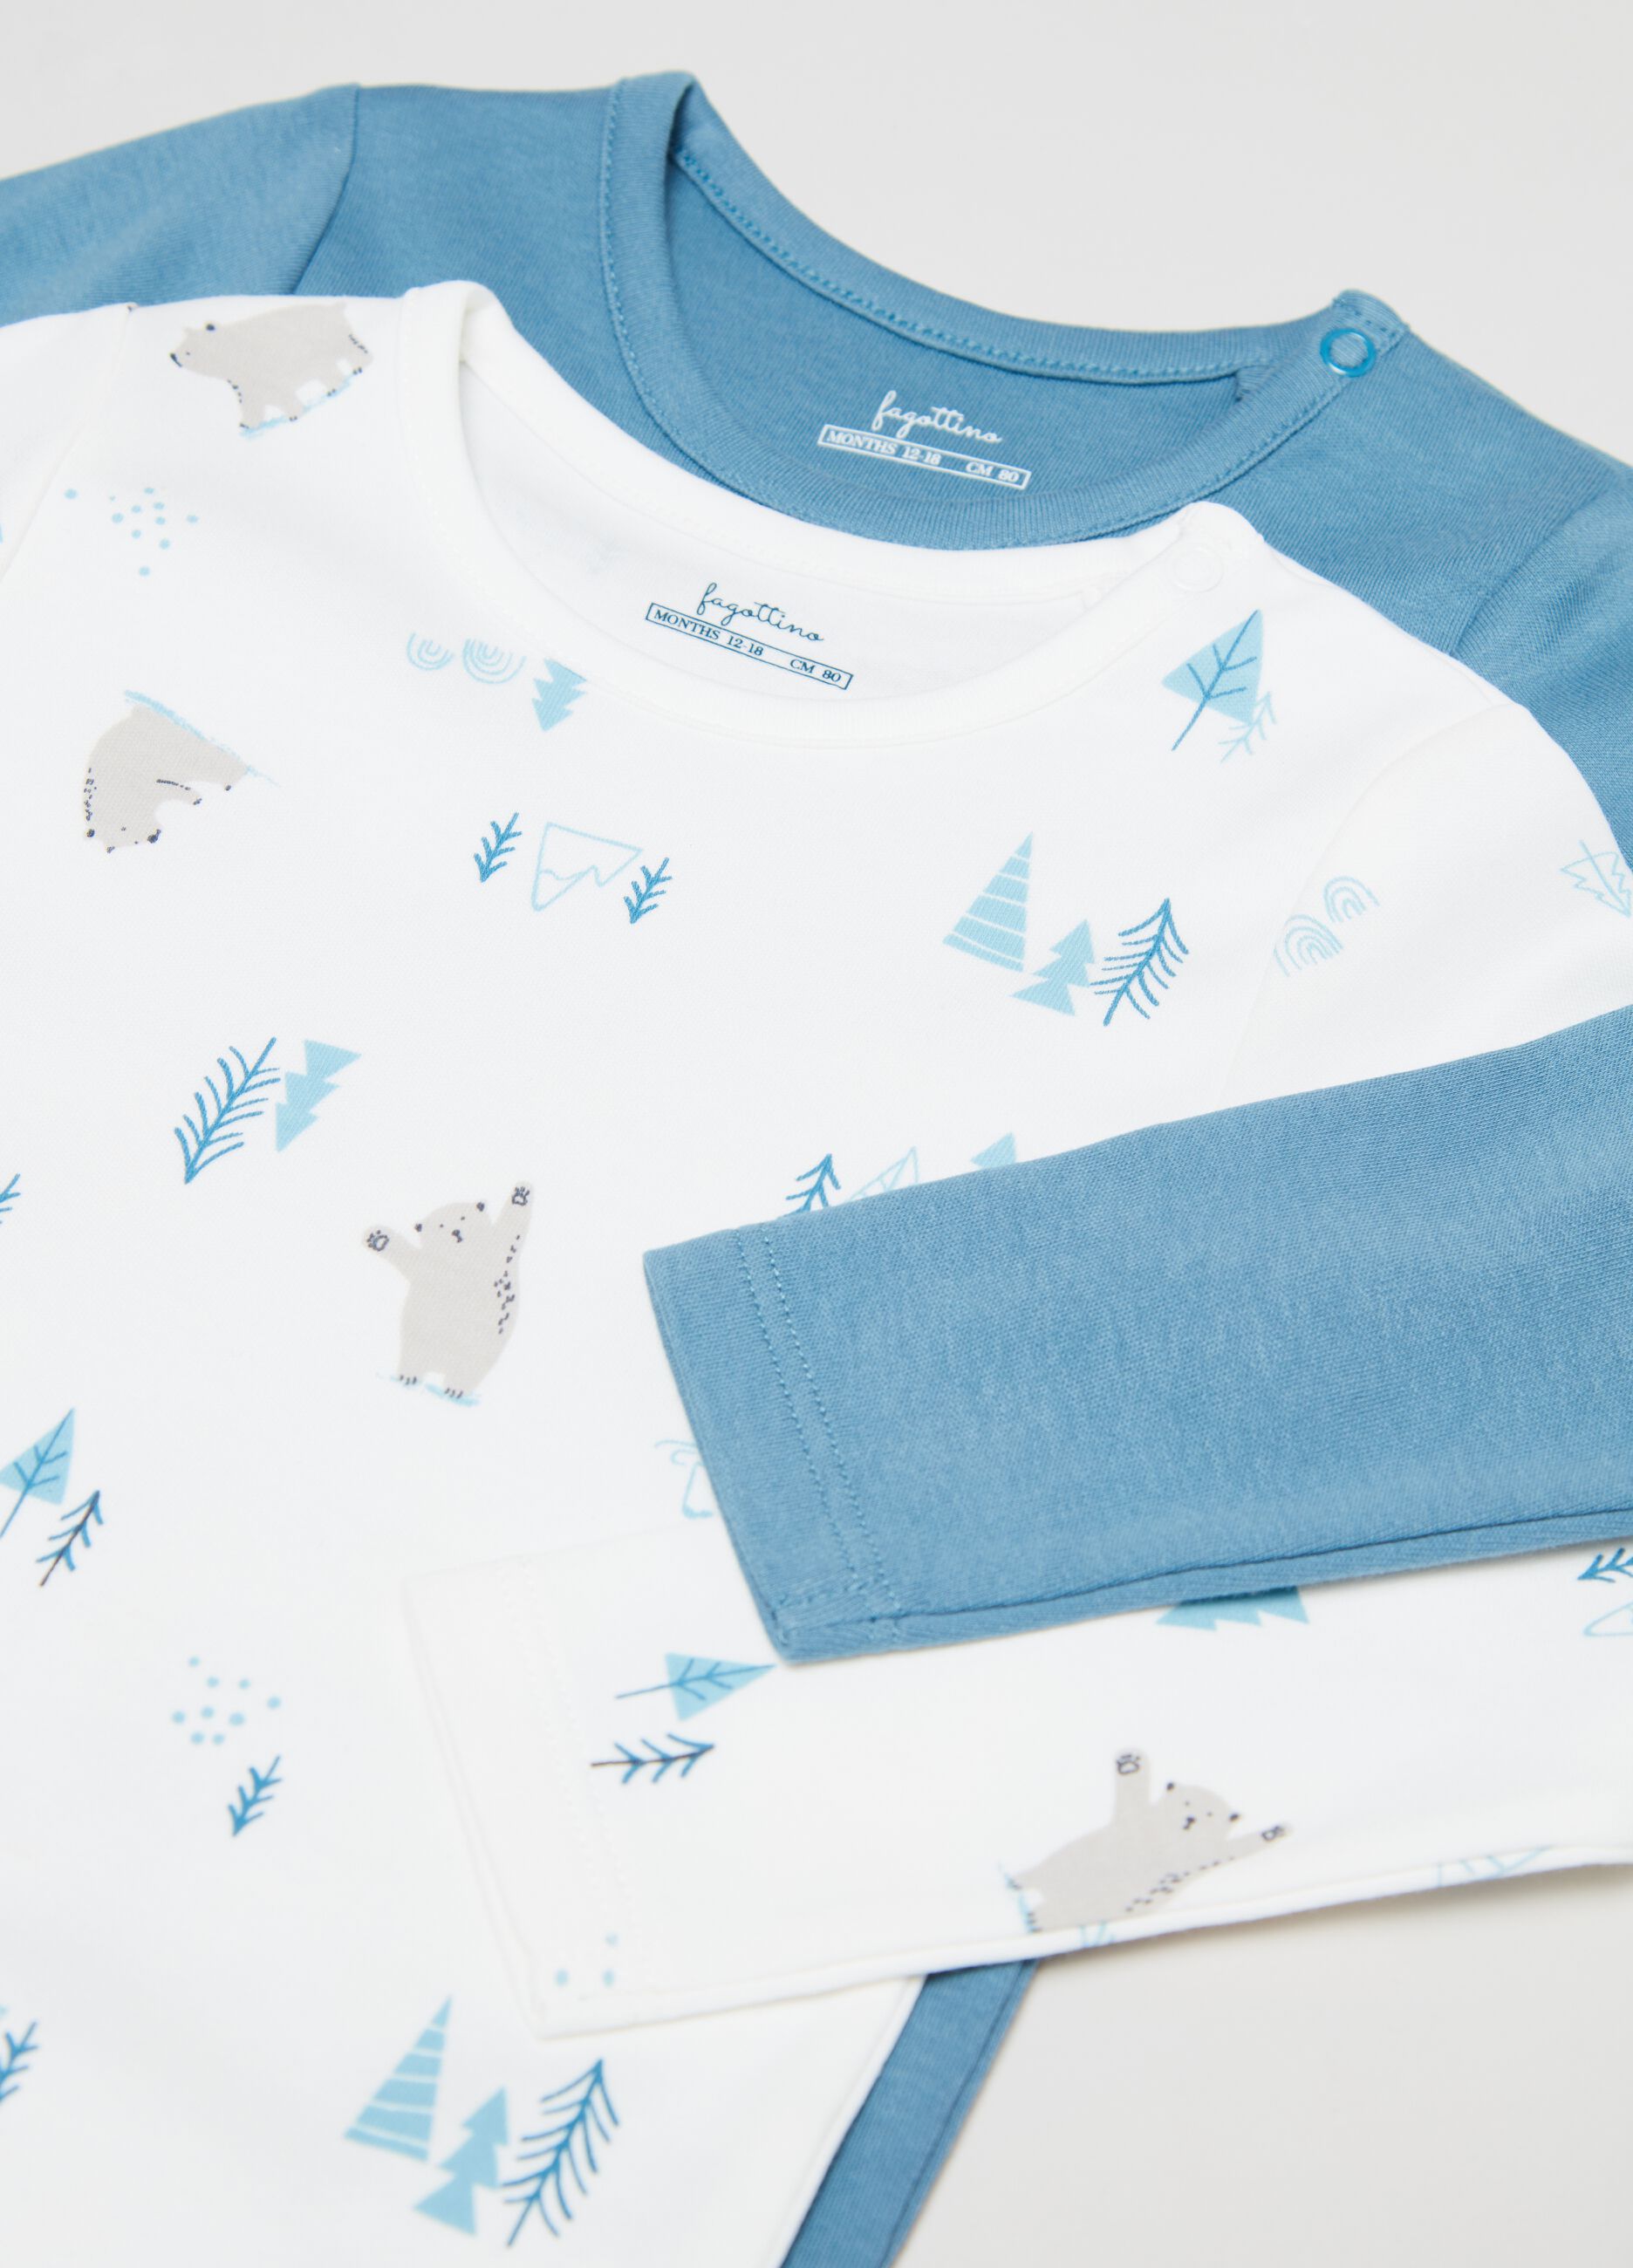 Pack of two long-sleeved cotton onesies